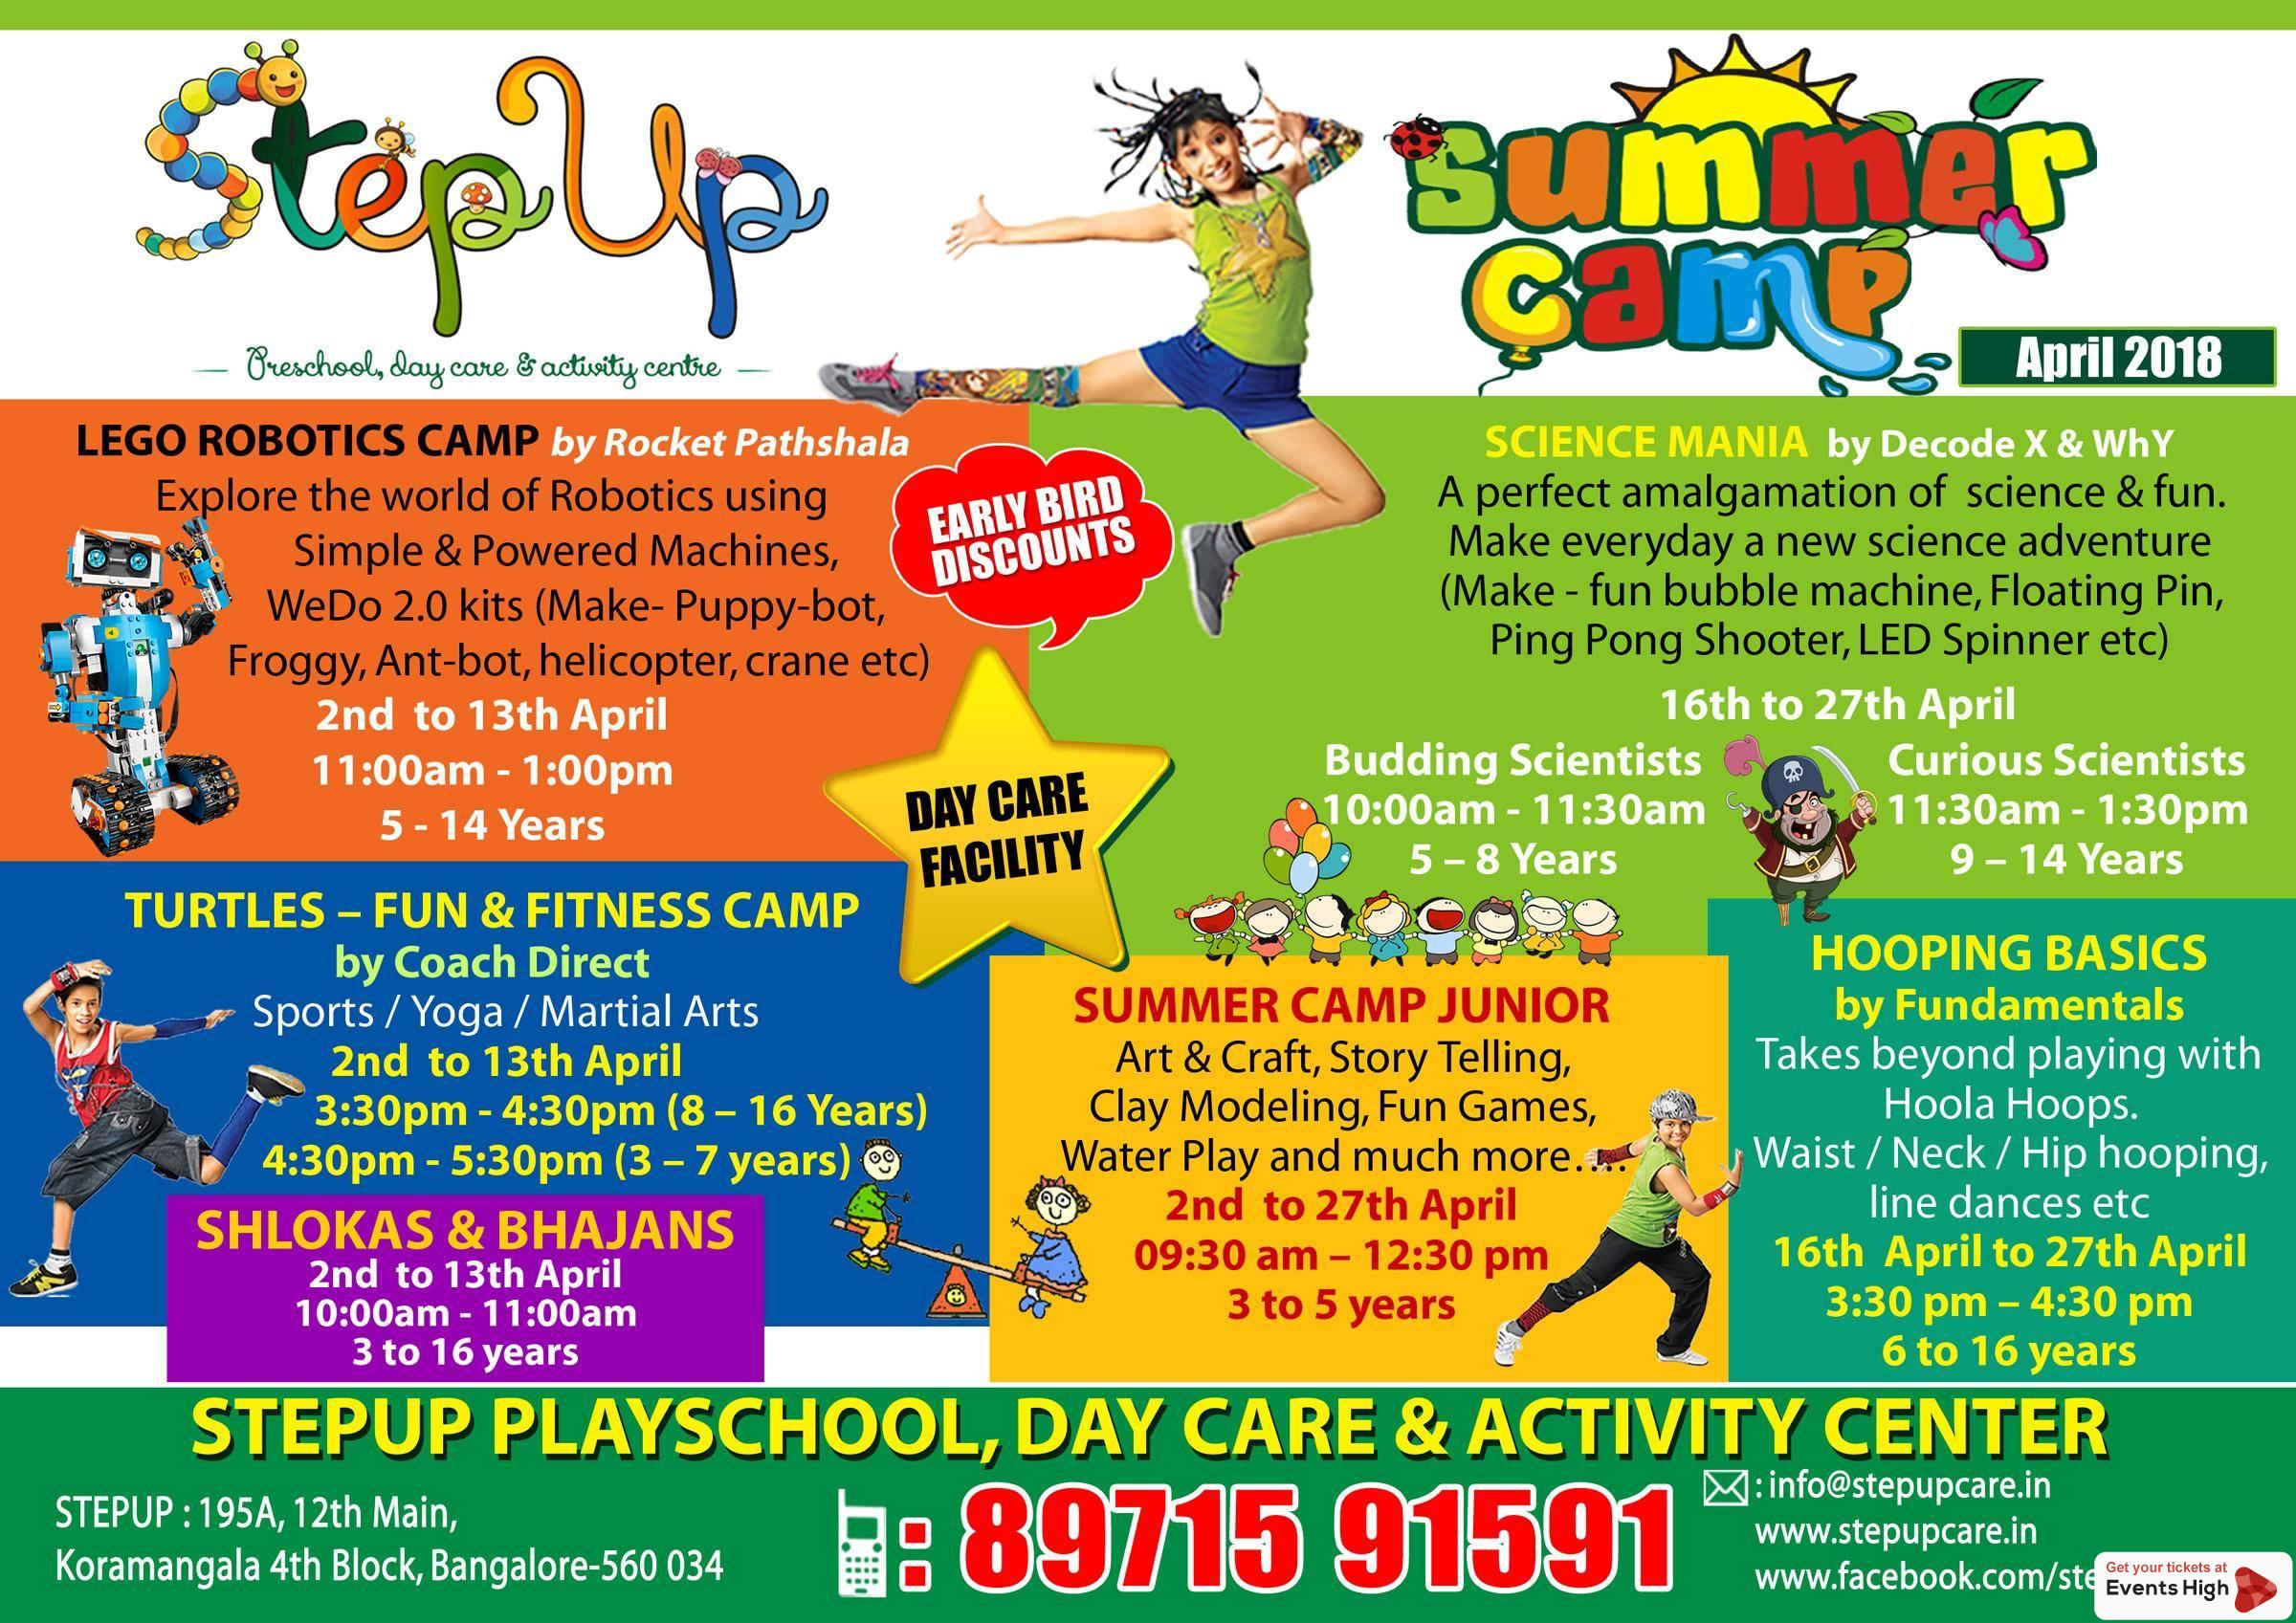 Stepup Care - Turtles Sports & Games + Martial Arts by Coach Direct